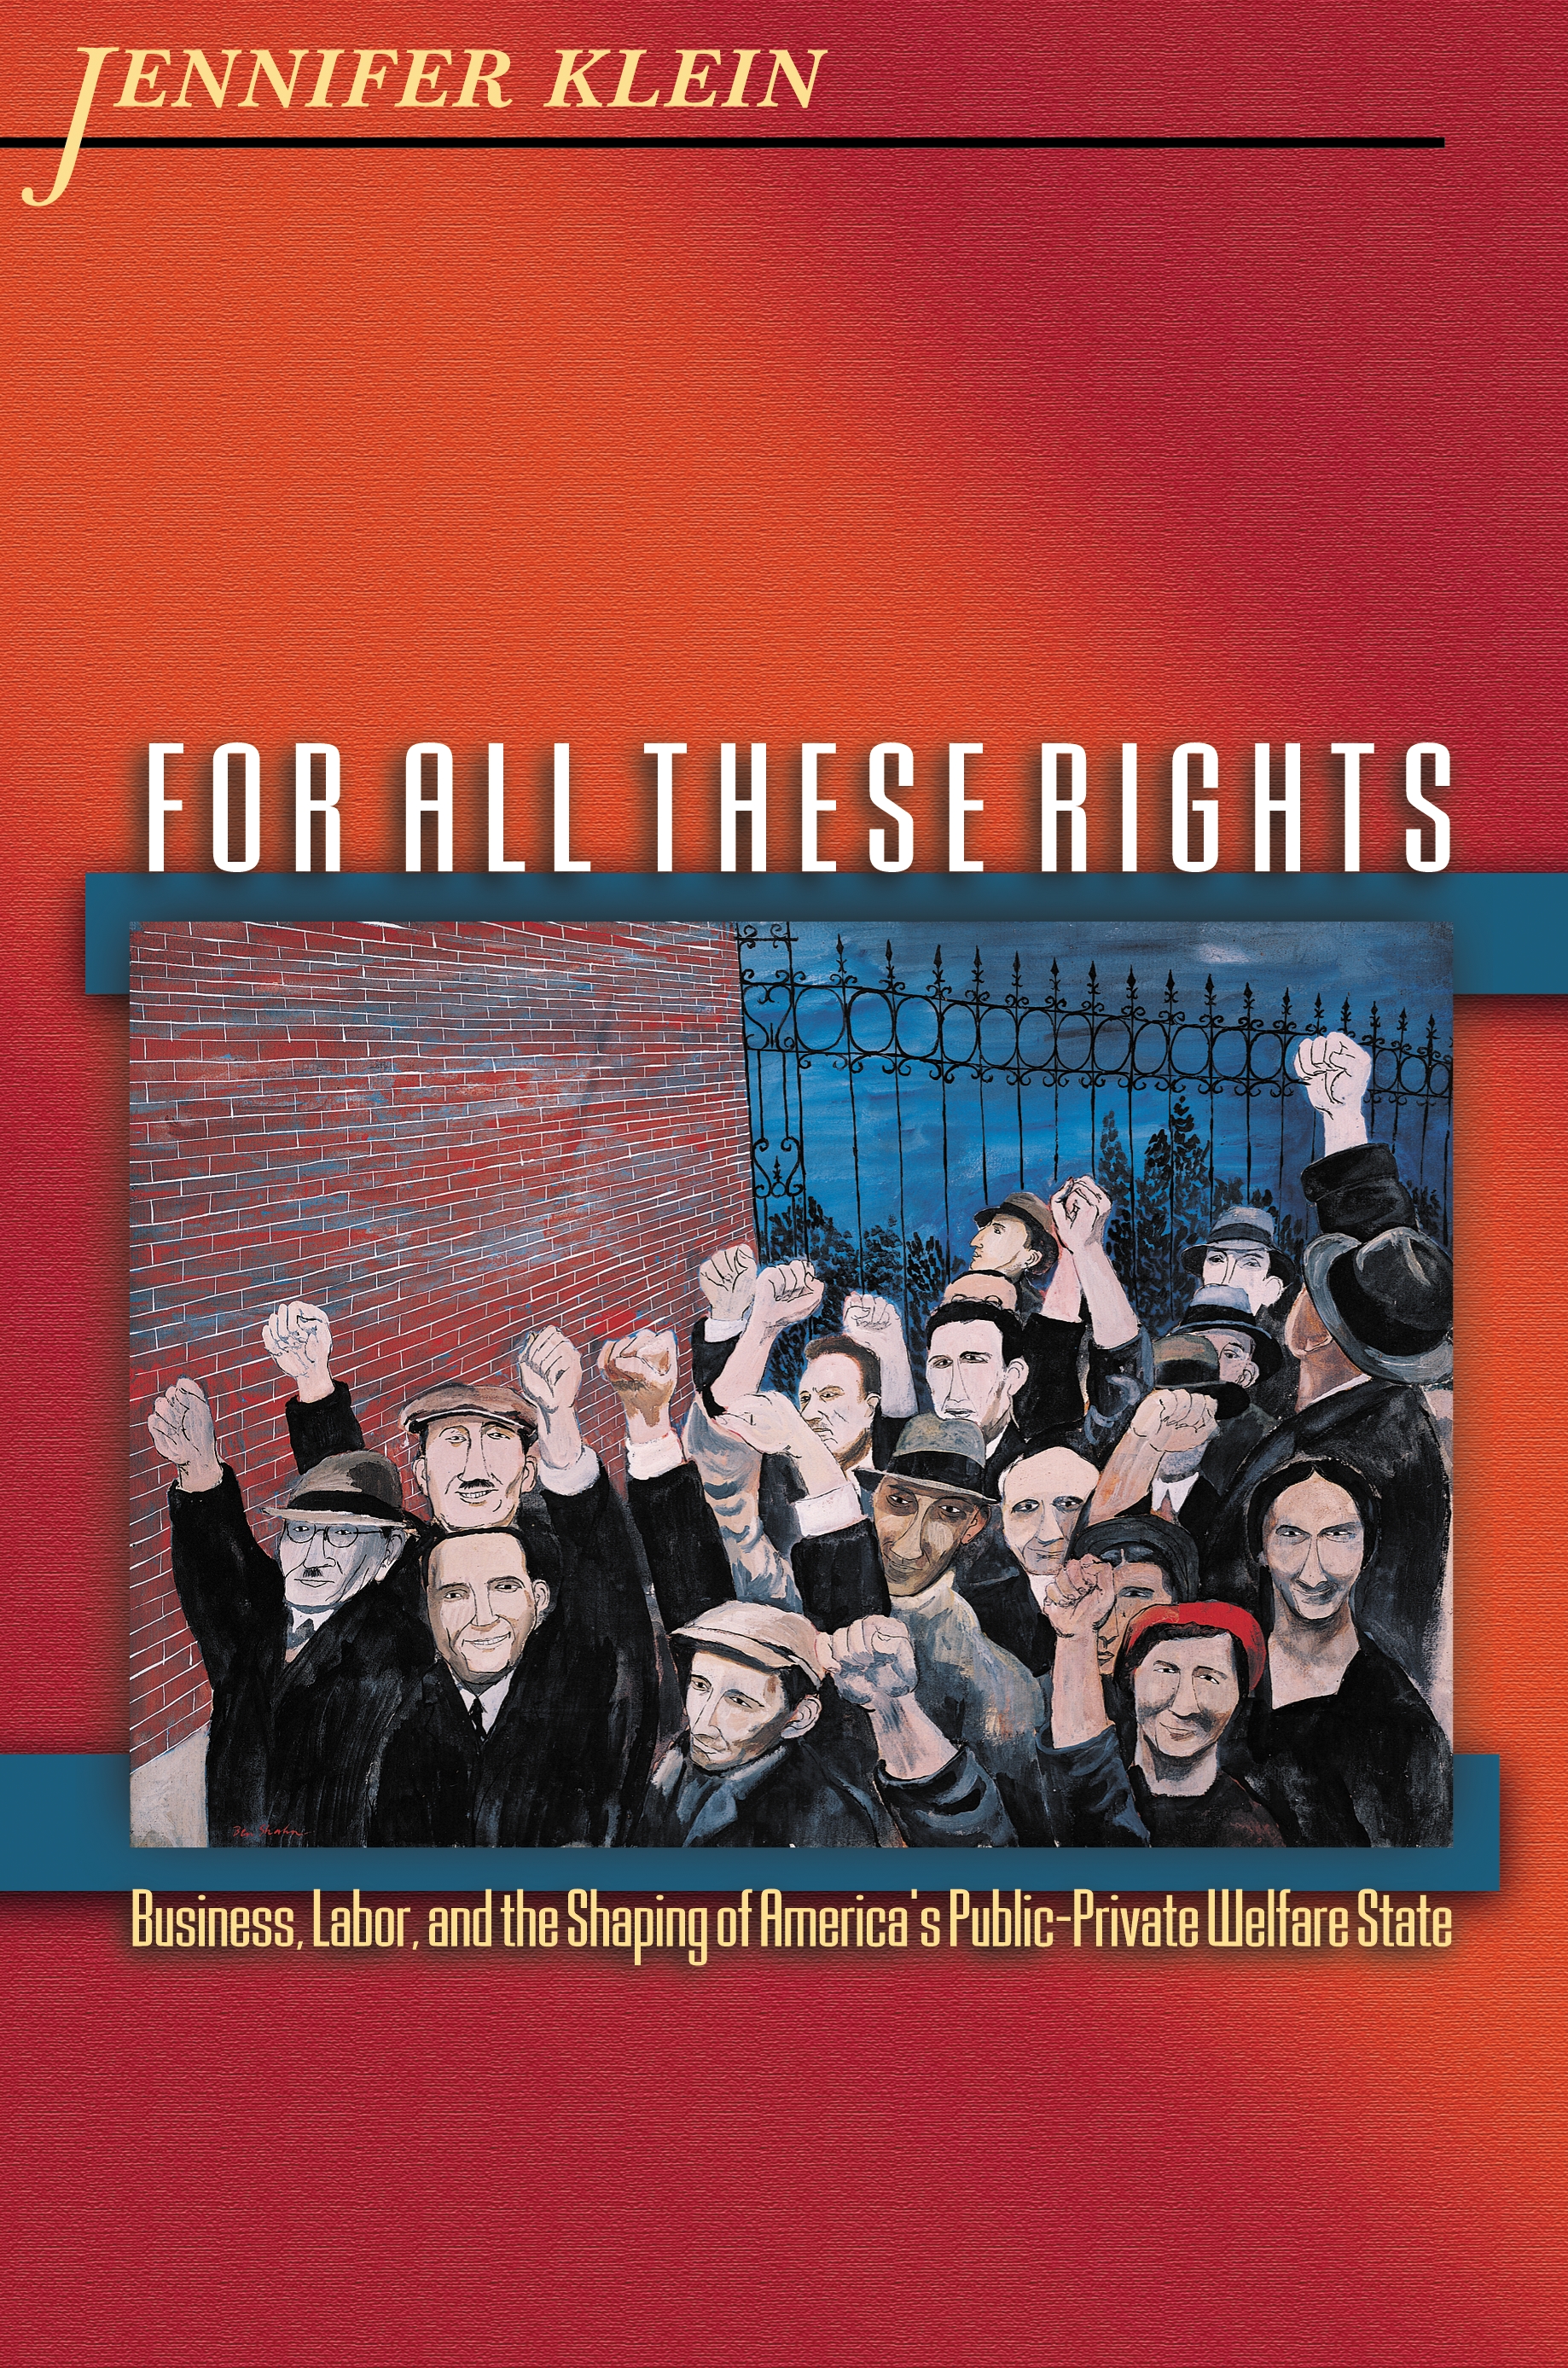 For All These Rights  Princeton University Press